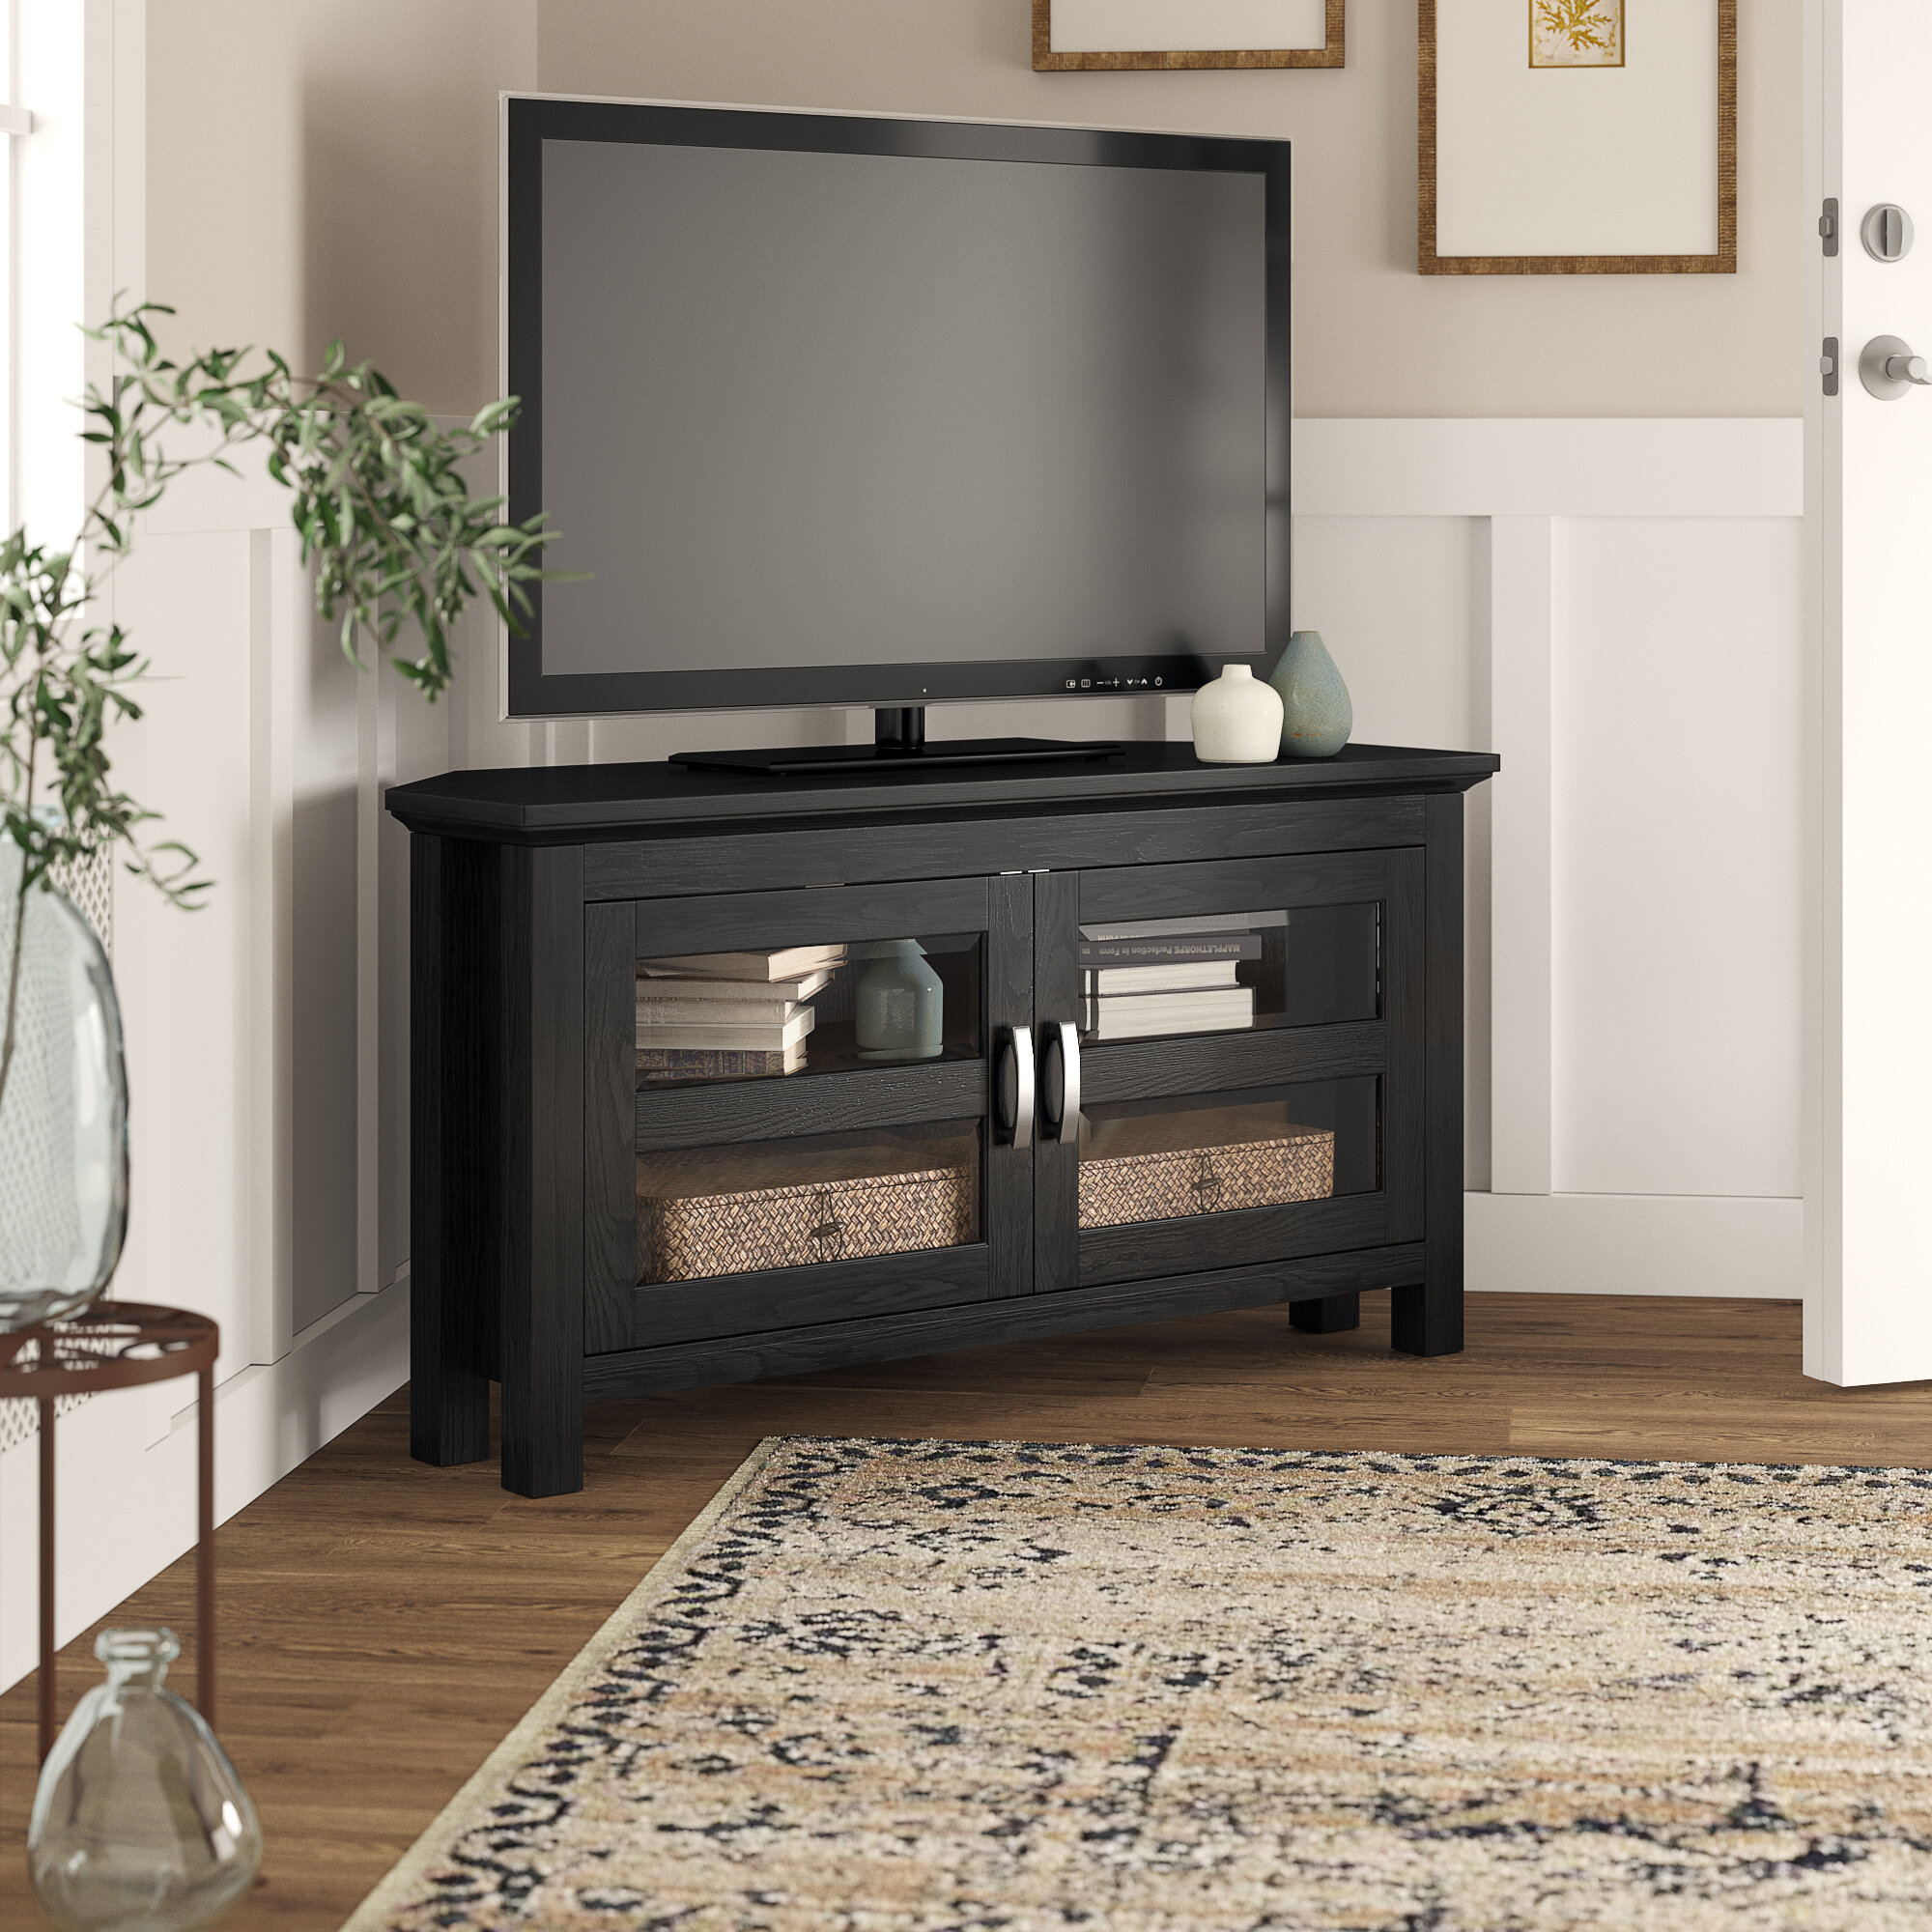 Details about   Dark Modern Tv Stand Solid Wood Entertainment Center Home 50 inch Large Screen 